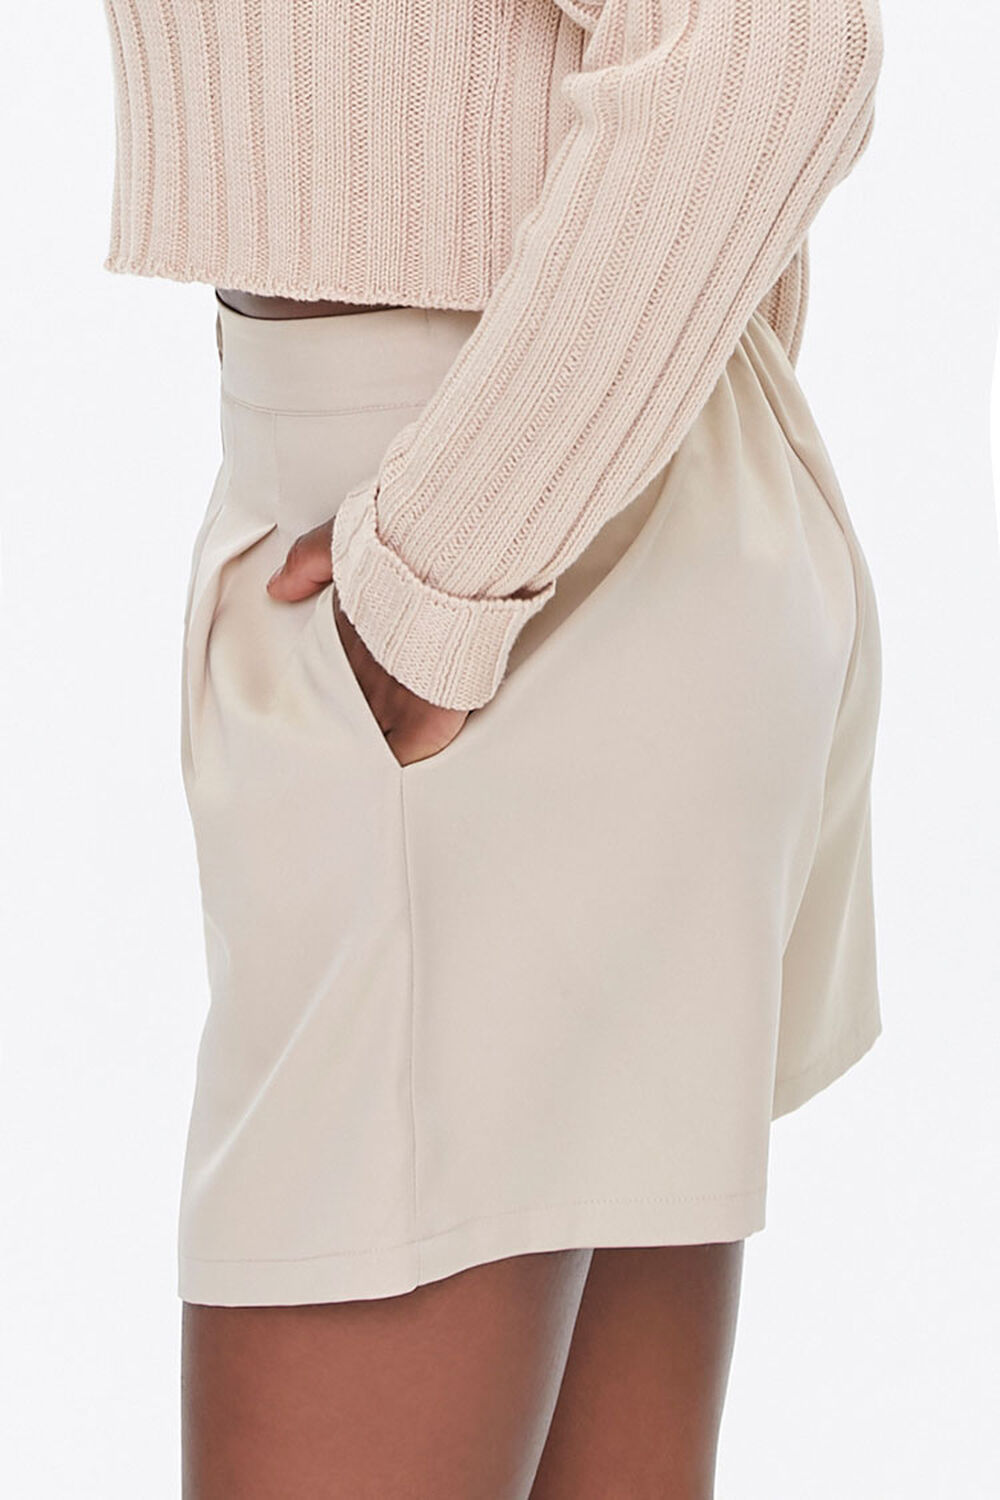 SAND Pleated High-Rise Shorts, image 3